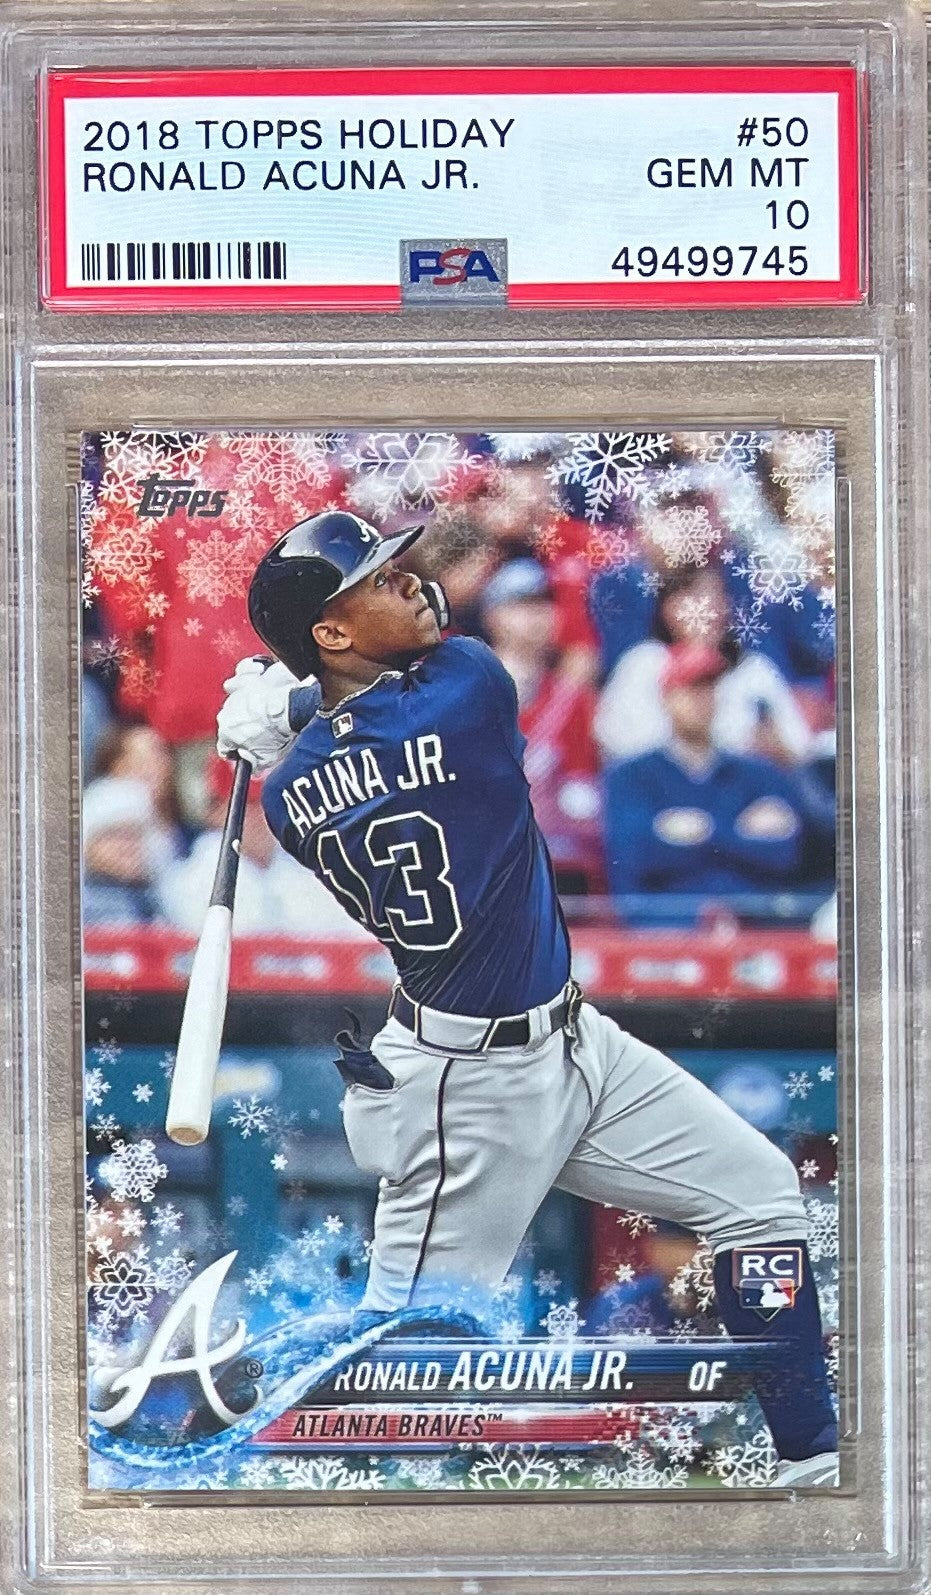 2018 Topps Holiday Ronald Acuna Jr Rookie Card PSA 10